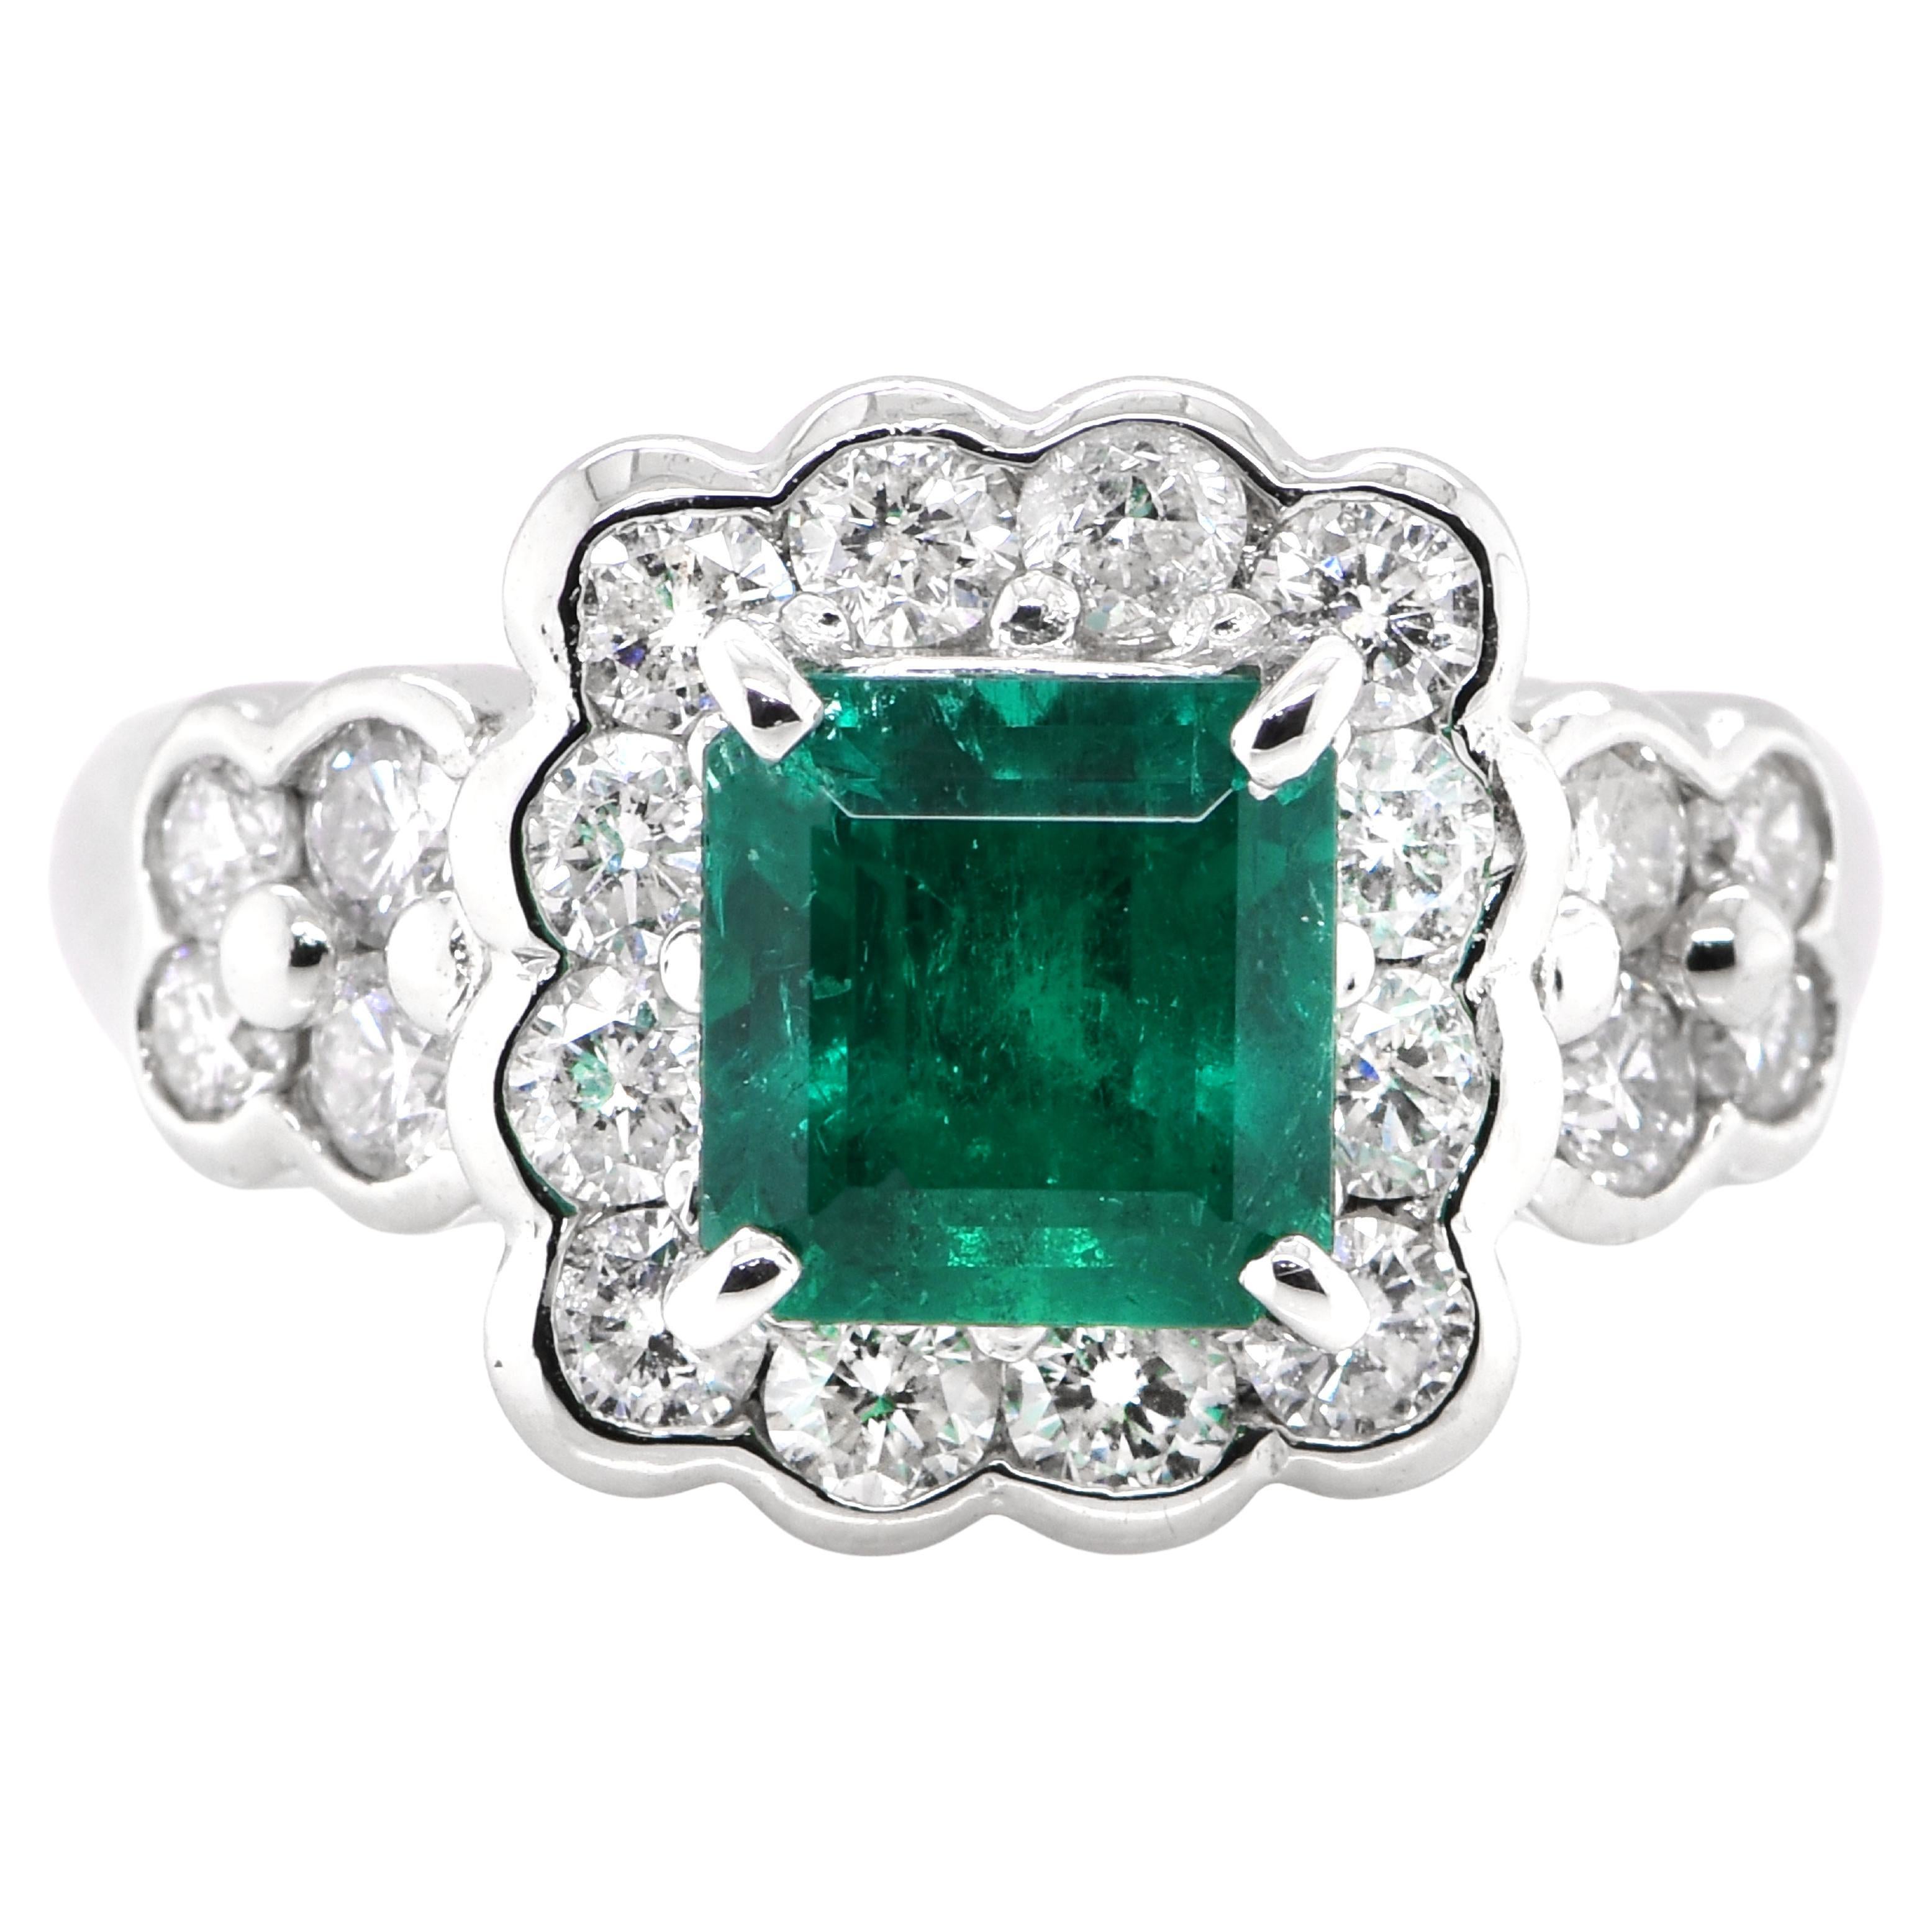 GIA Certified 1.87 Carat, Colombian, Muzo Green Emerald Ring set in Platinum For Sale